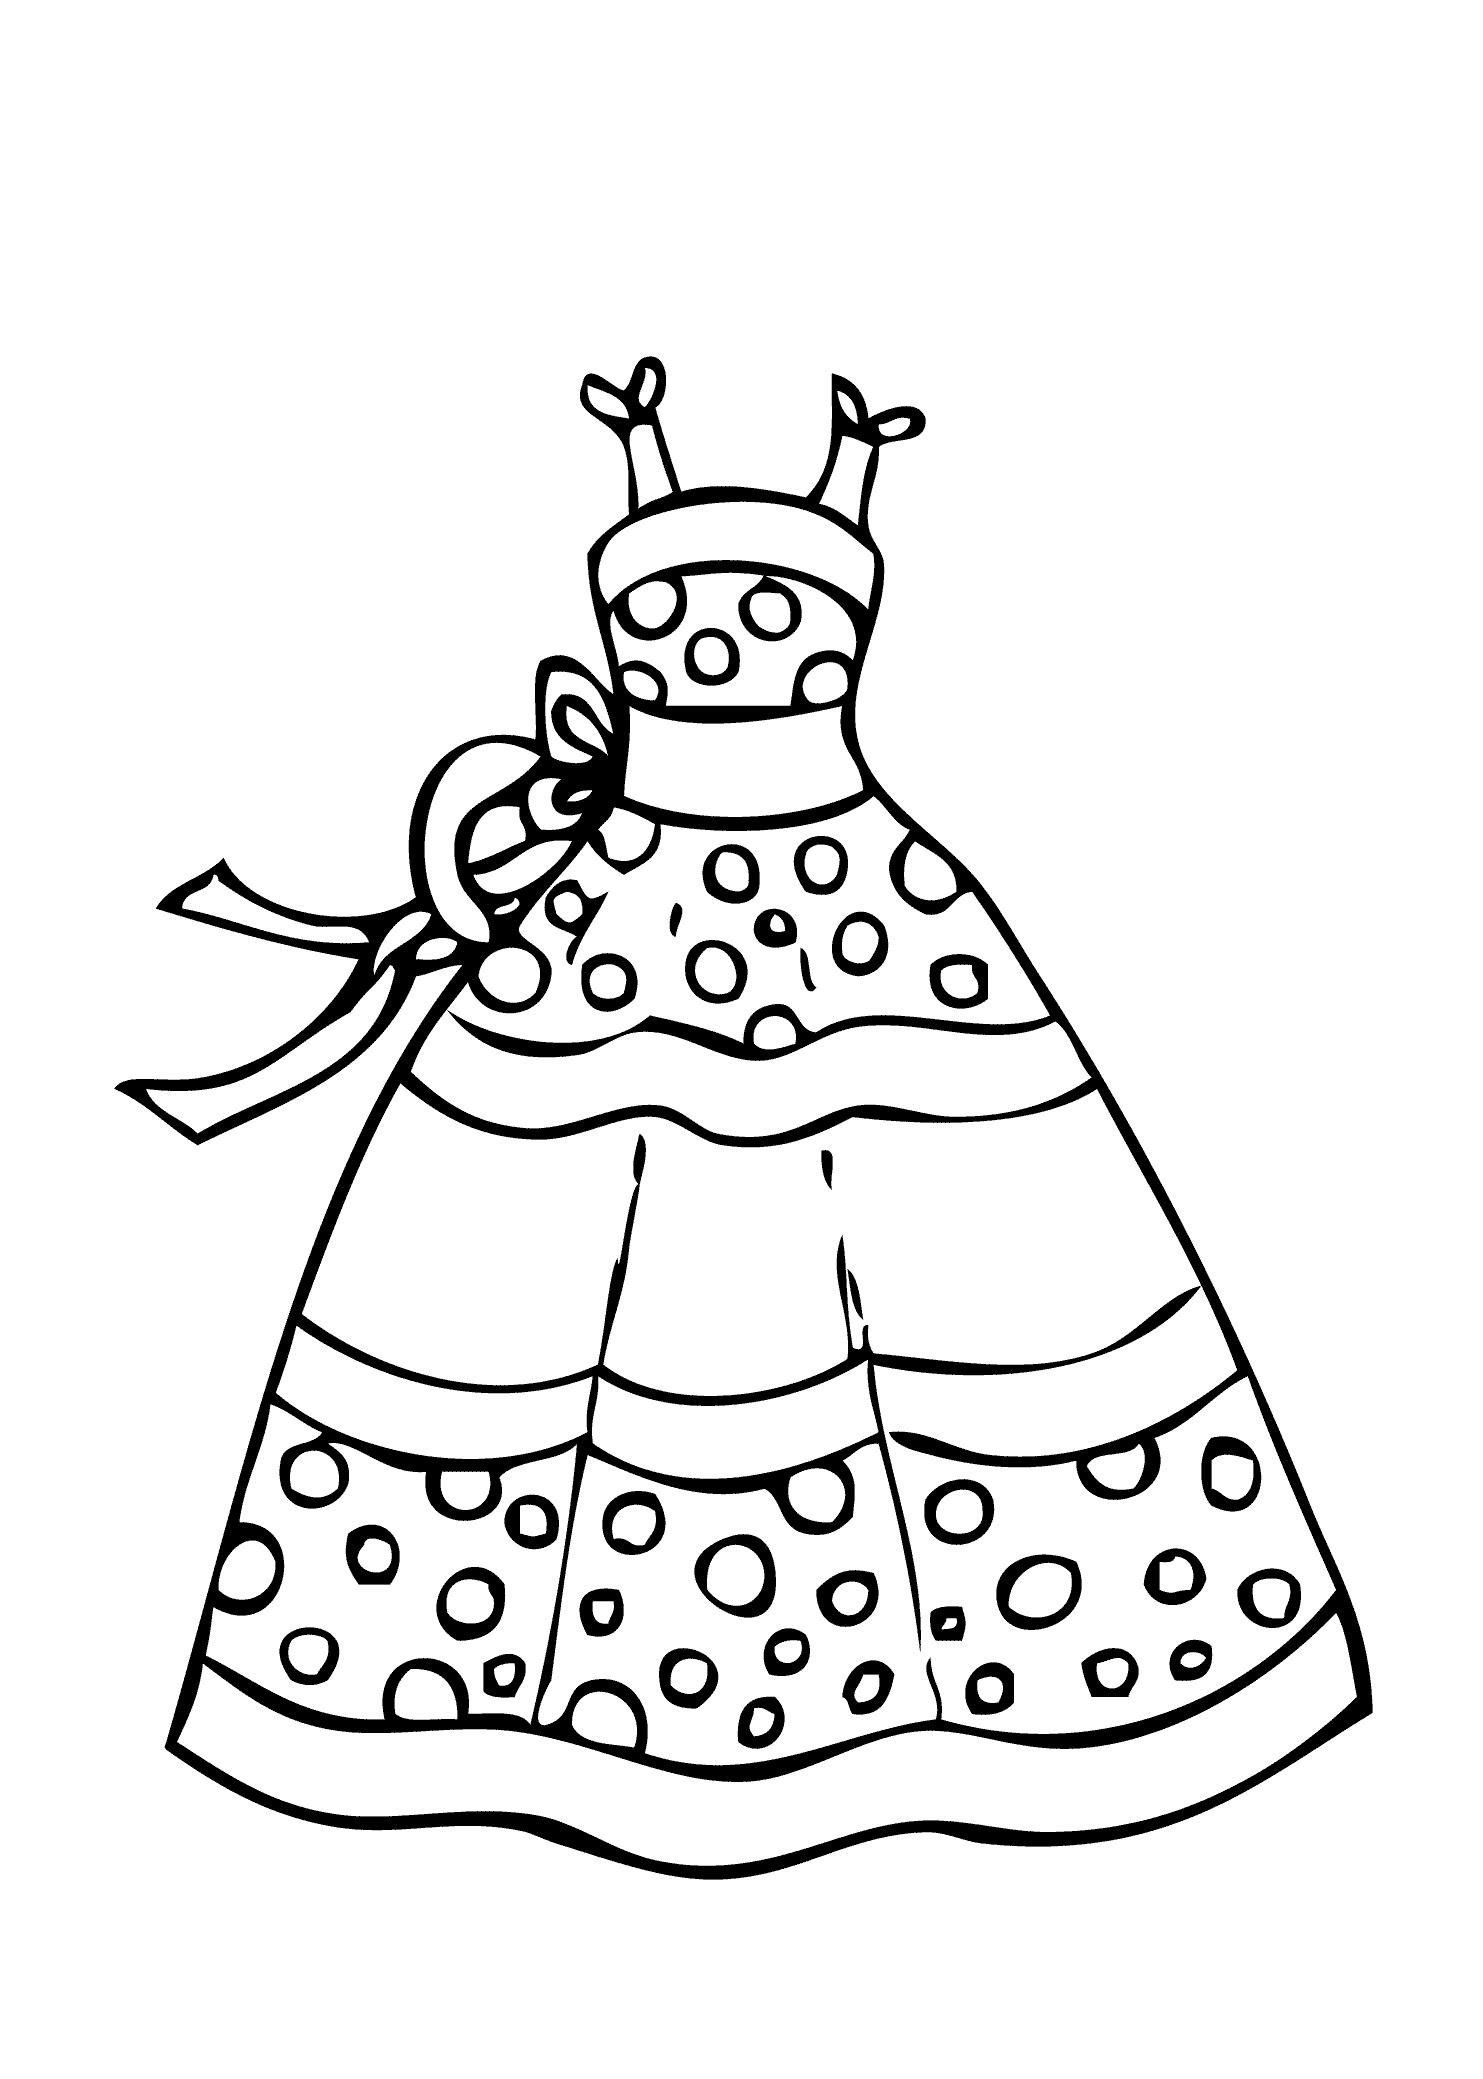 Free Coloring Sheets Of Kids Dressed In Career Clothing
 Dress summer polka dot coloring page for girls printable